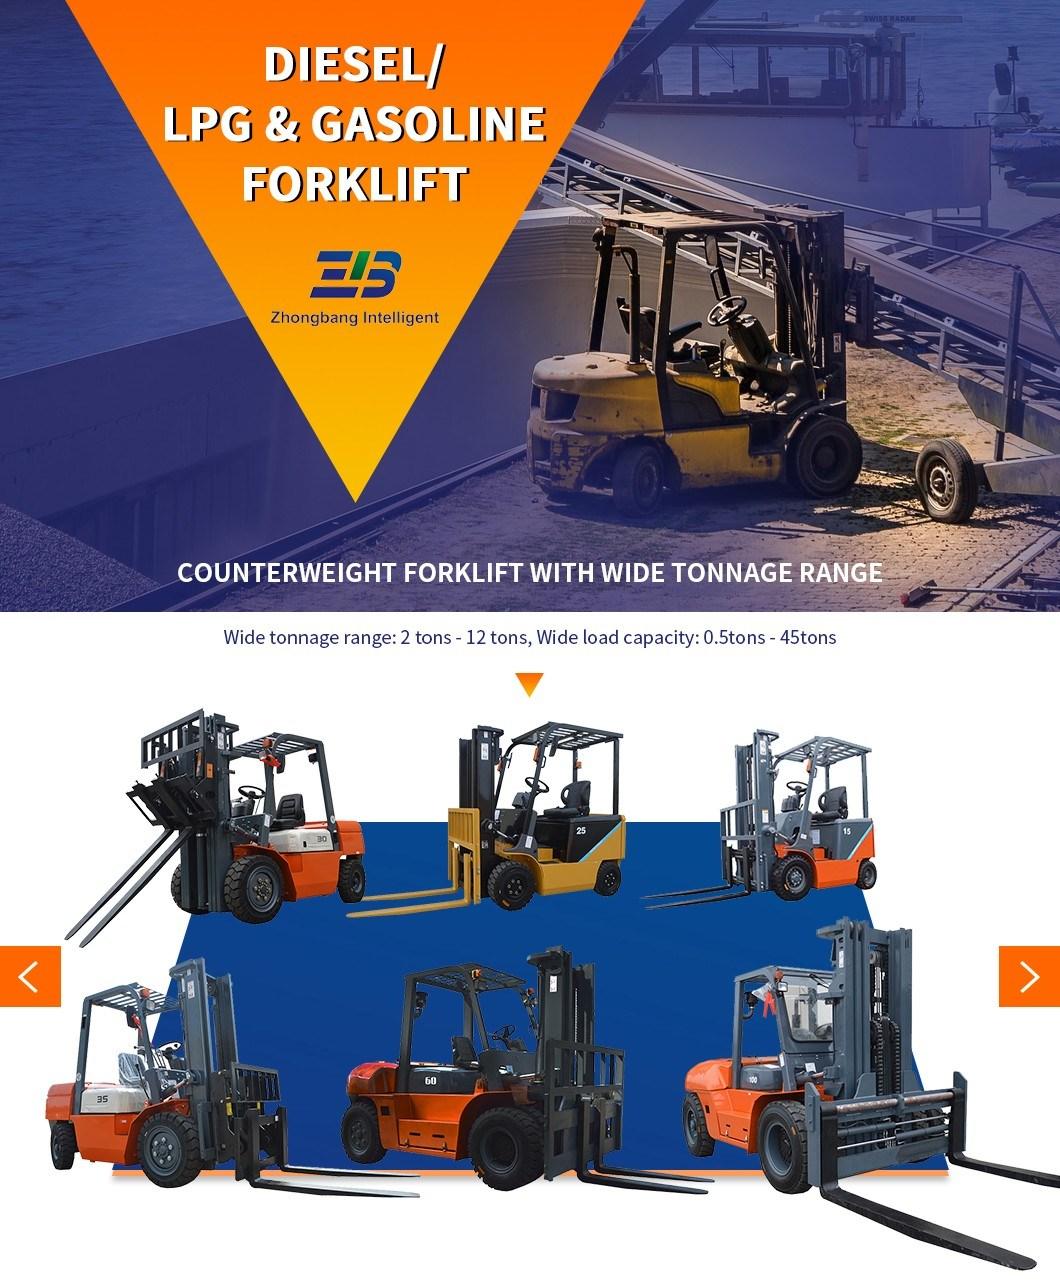 Factory Diesel Forklift 2ton Safe to Drive with High Performance Brake System